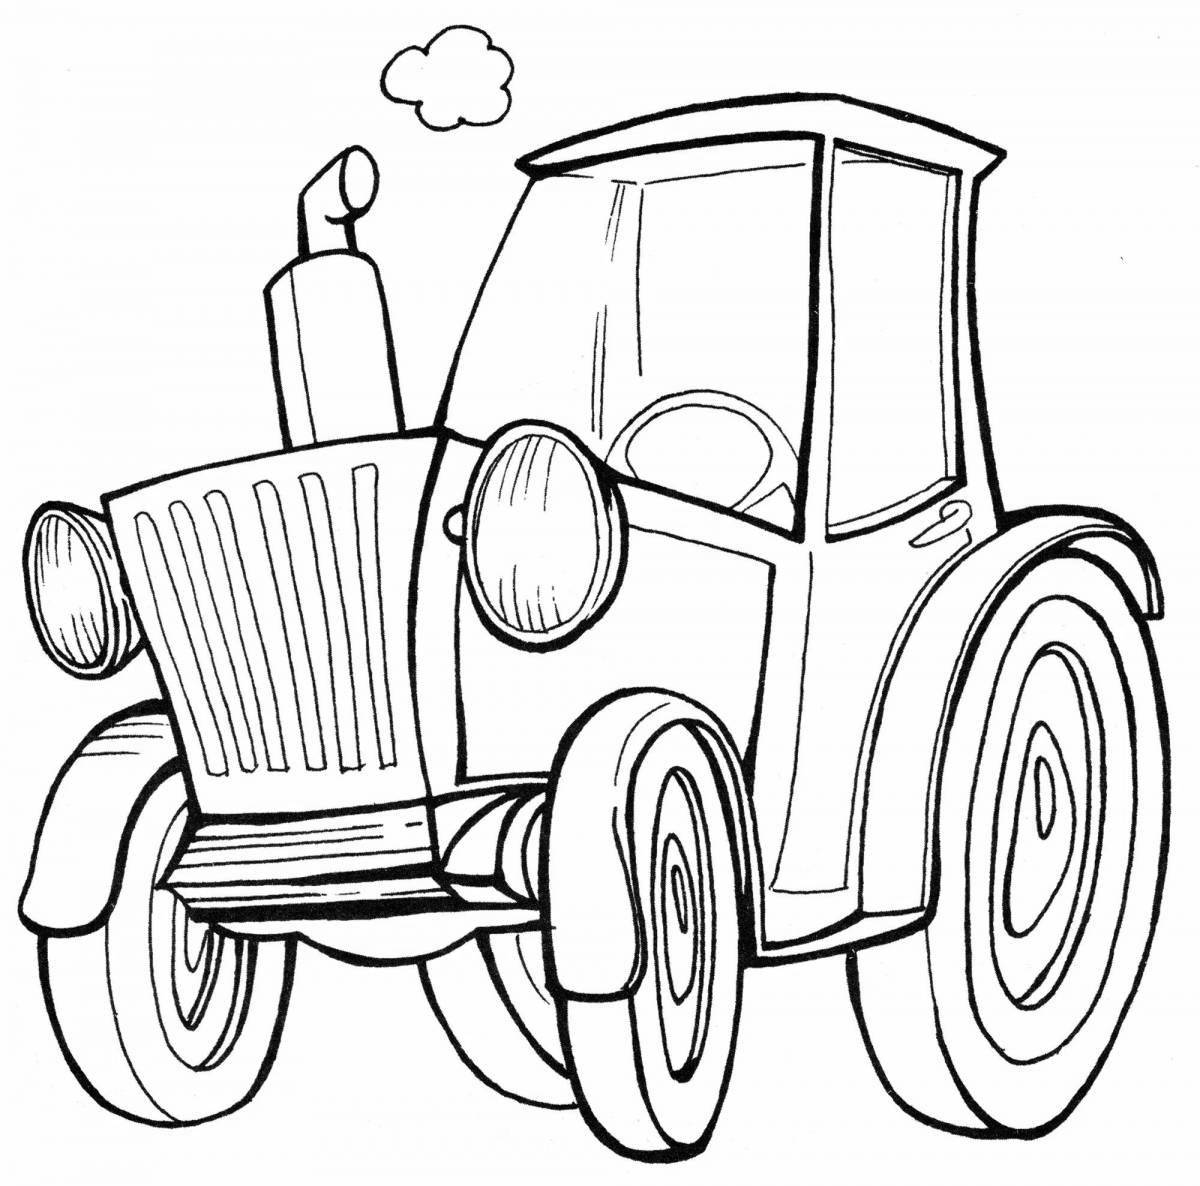 Great blue gosh tractor coloring page